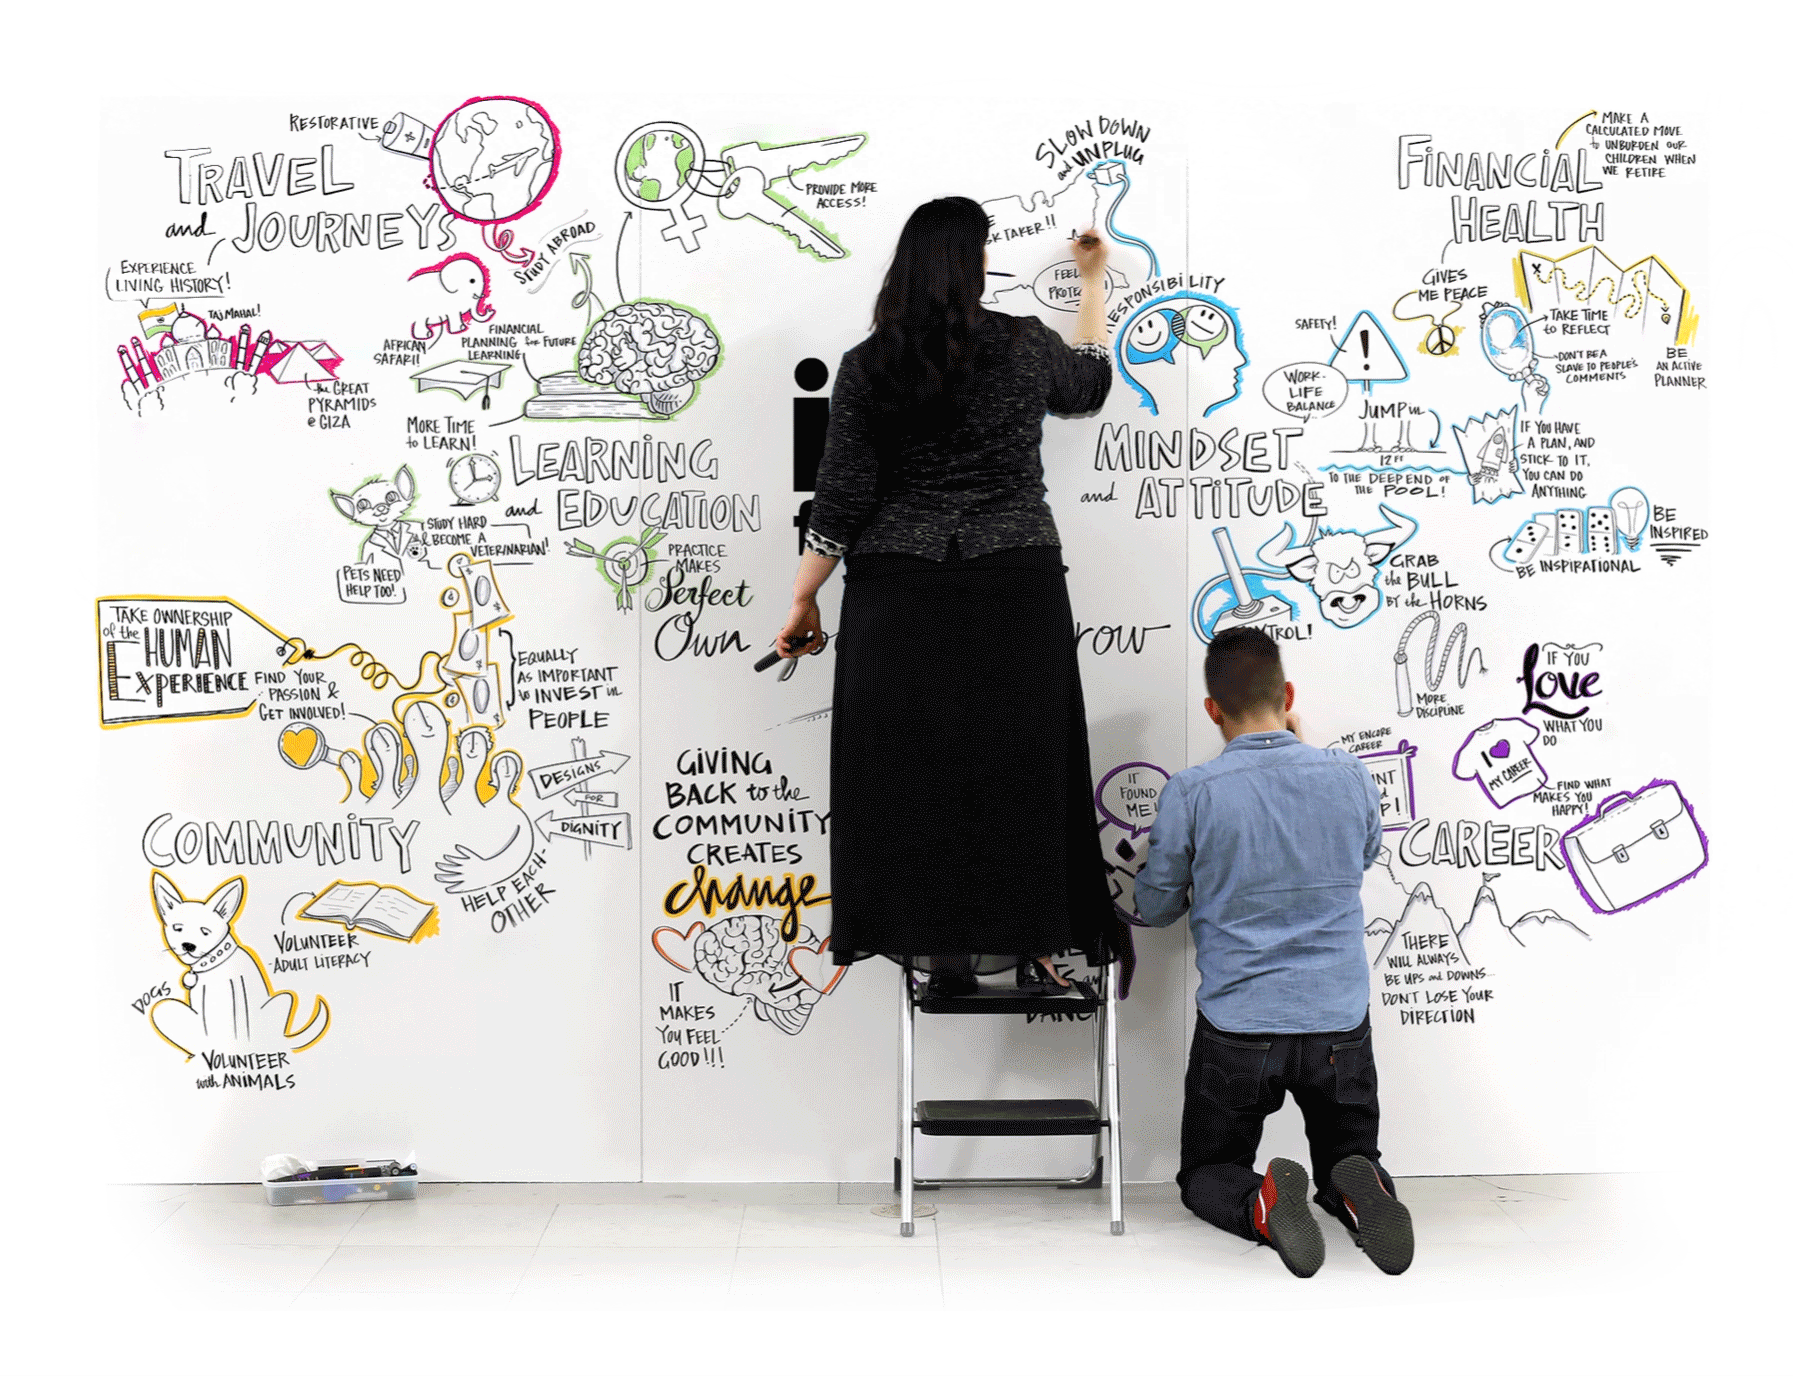 Two artists create live visual notes on a large mural